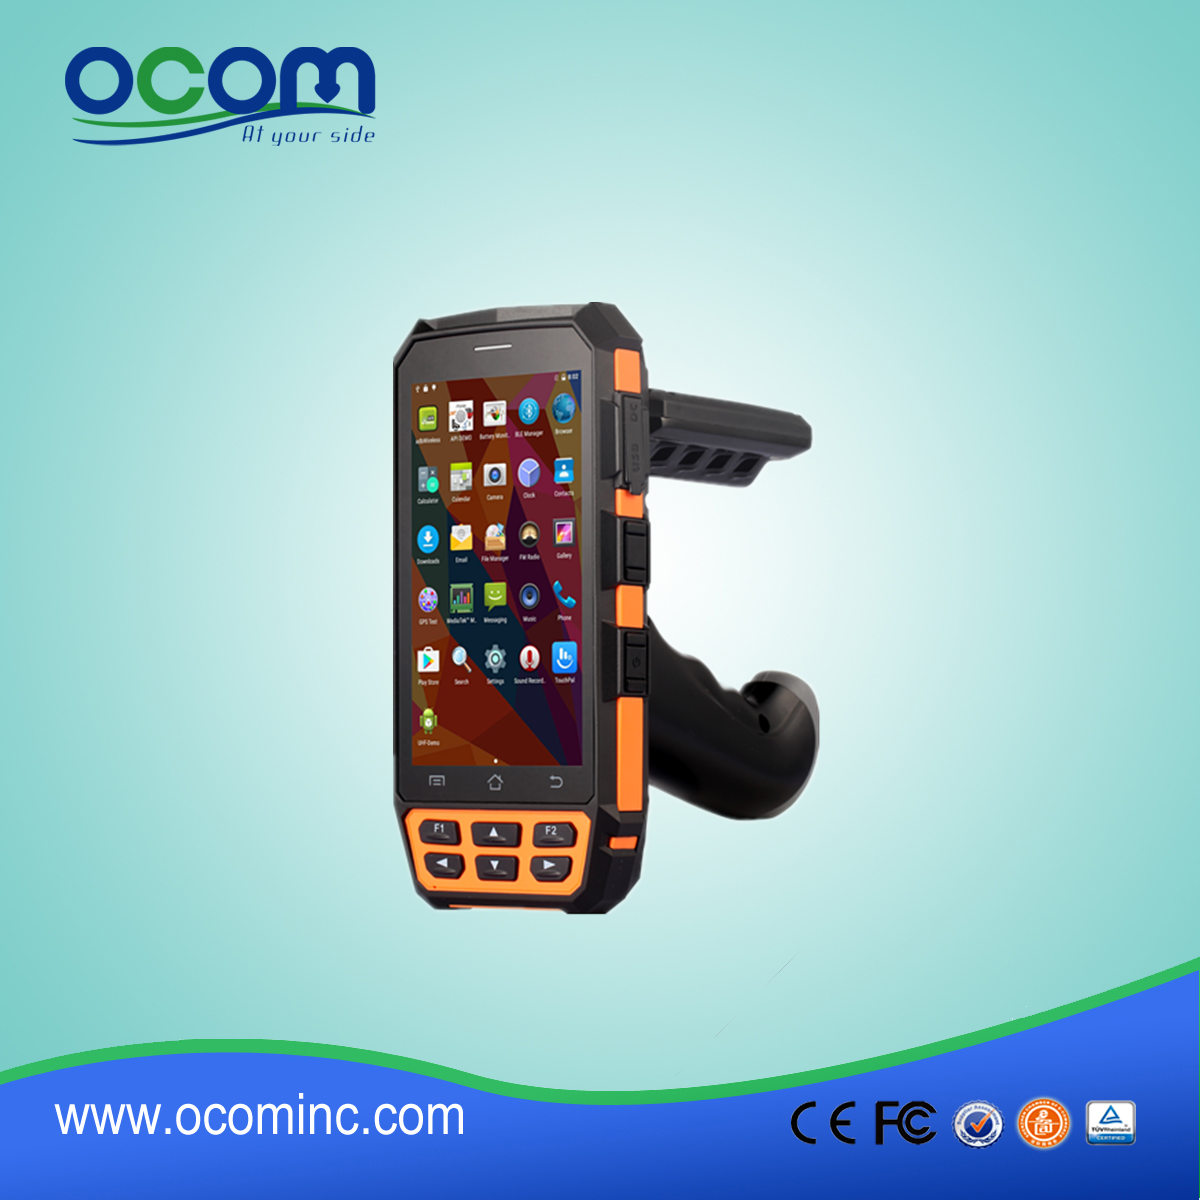 OCBS-D5000 industrial IP65 handheld PDA com Android os